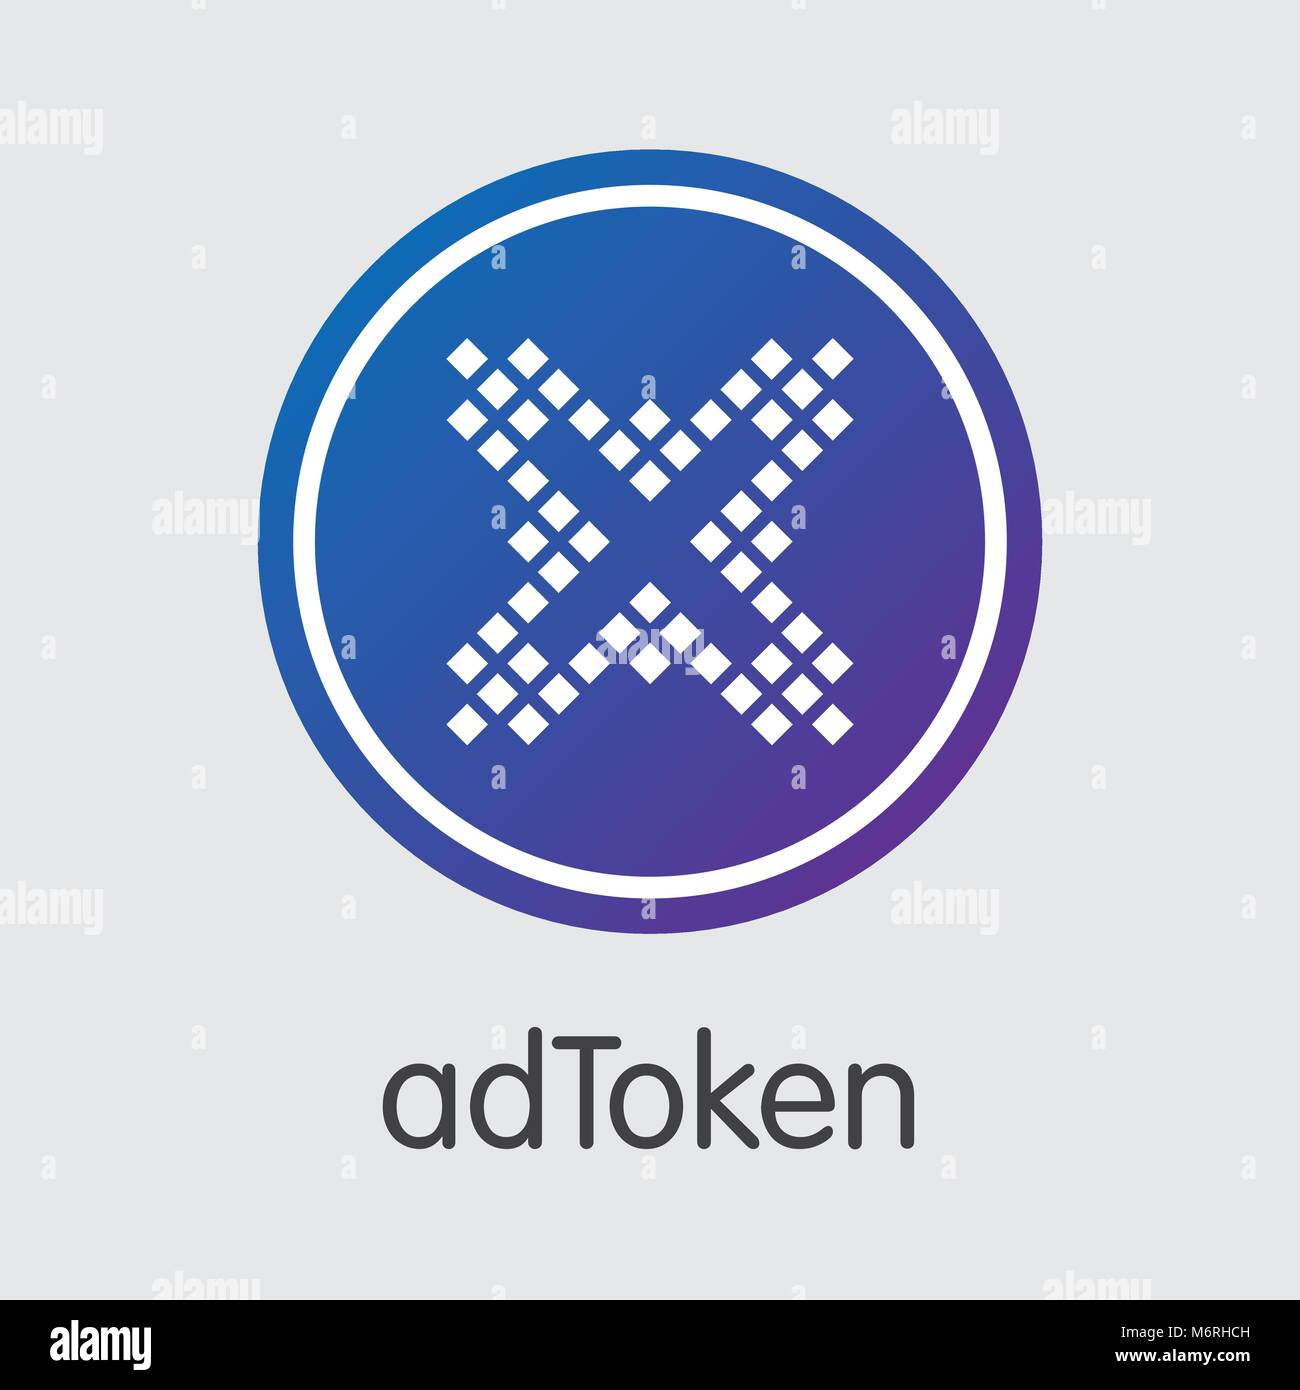 Adtoken - Cryptographic Currency Icon. Stock Vector